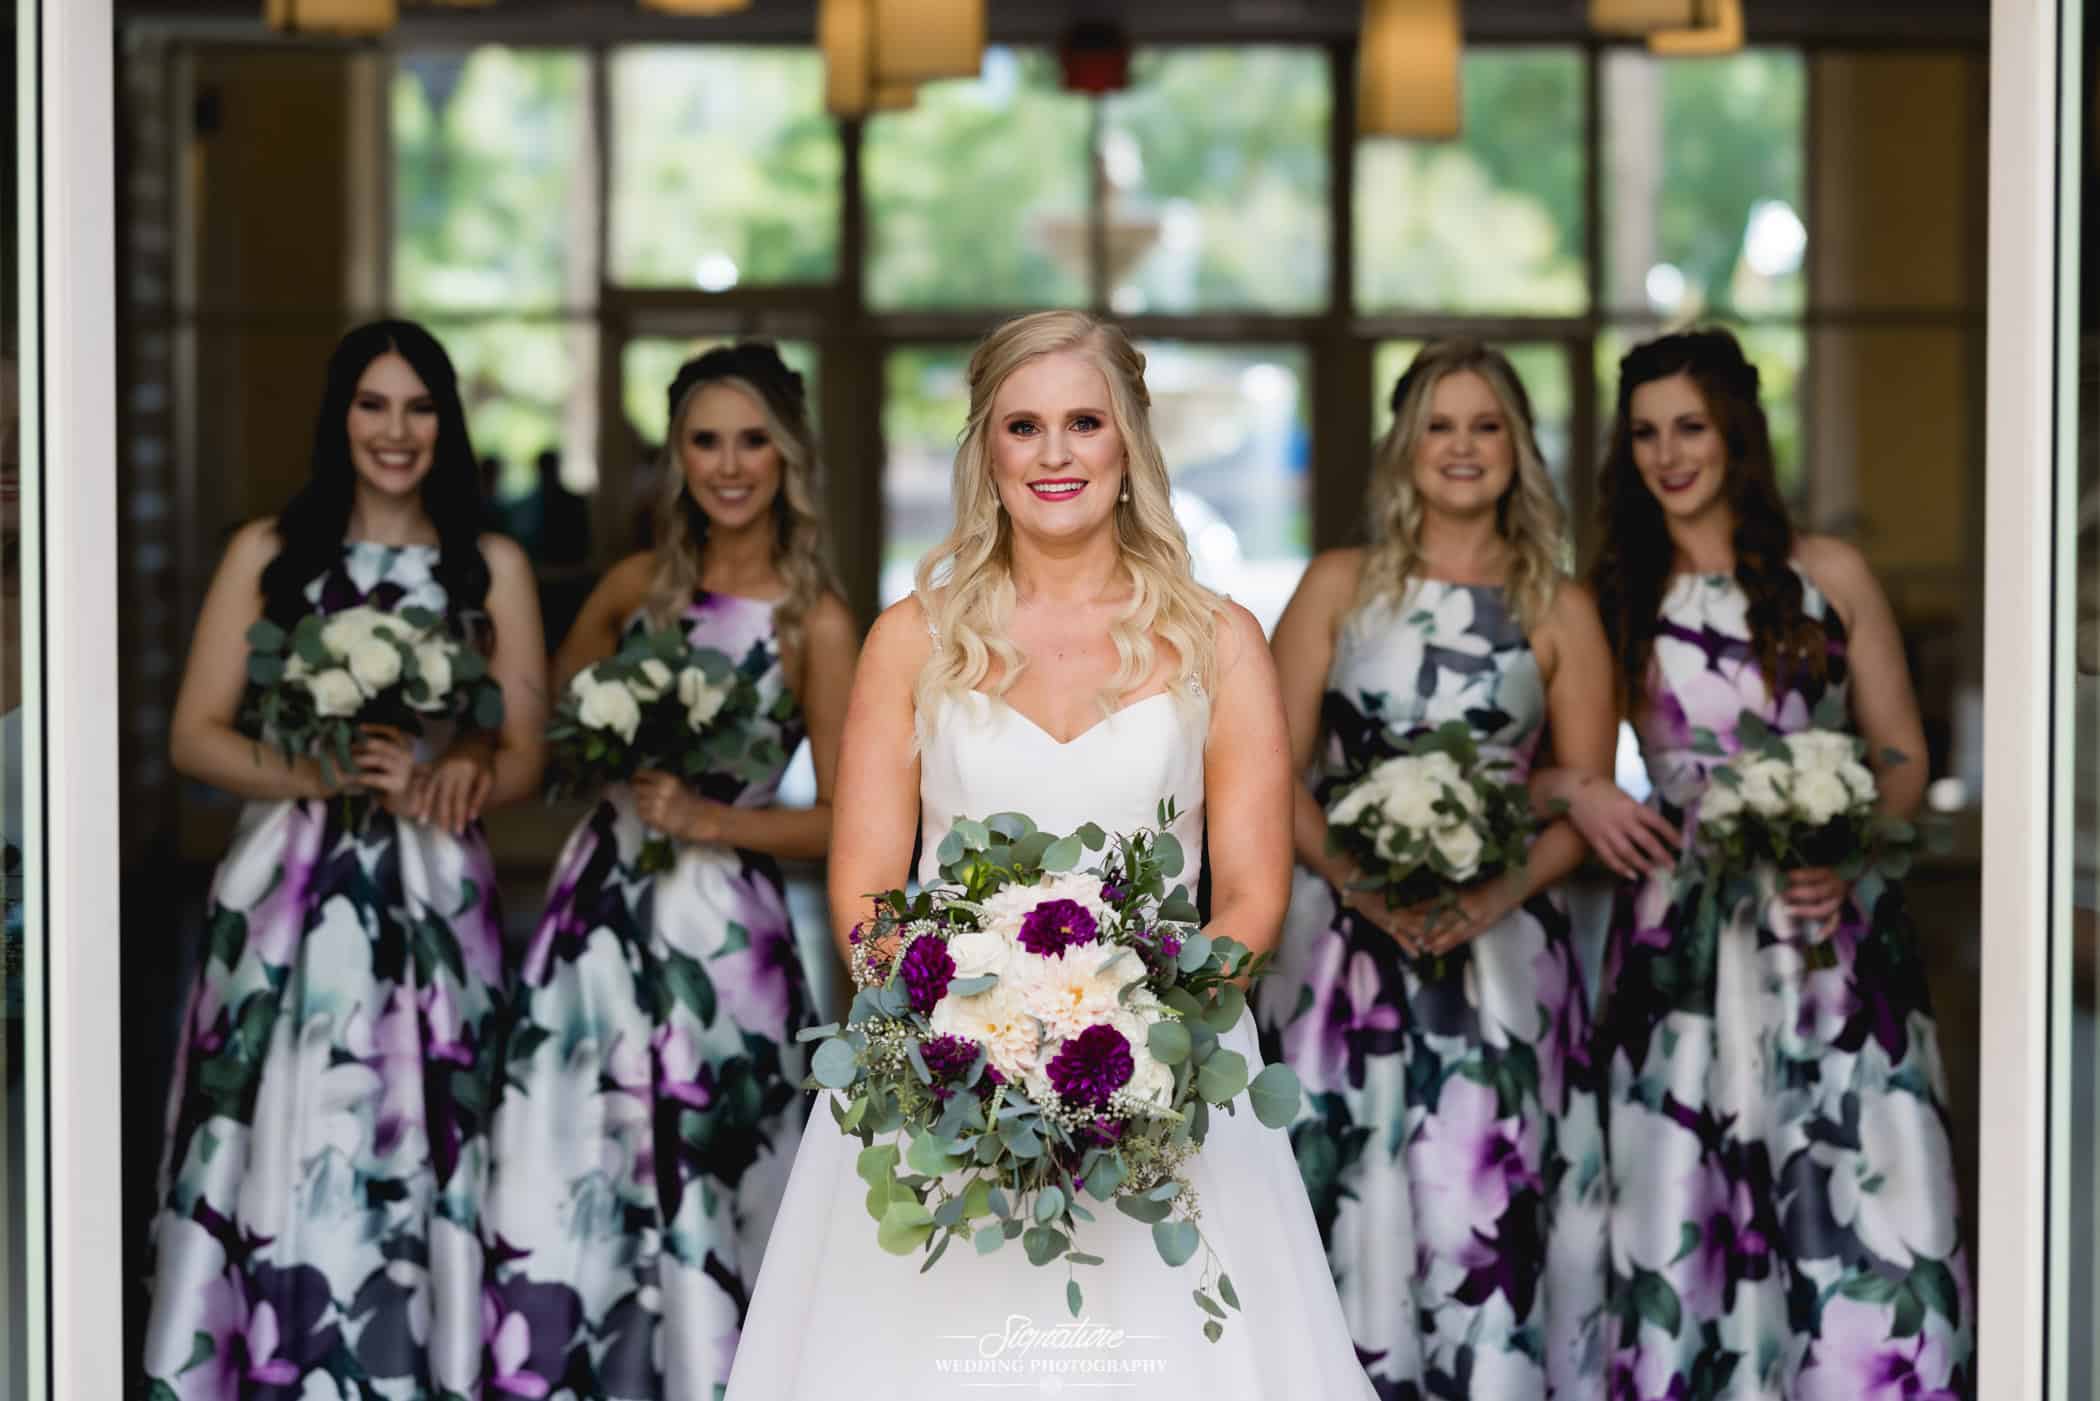 Bride smiling with bridesmaids behind her